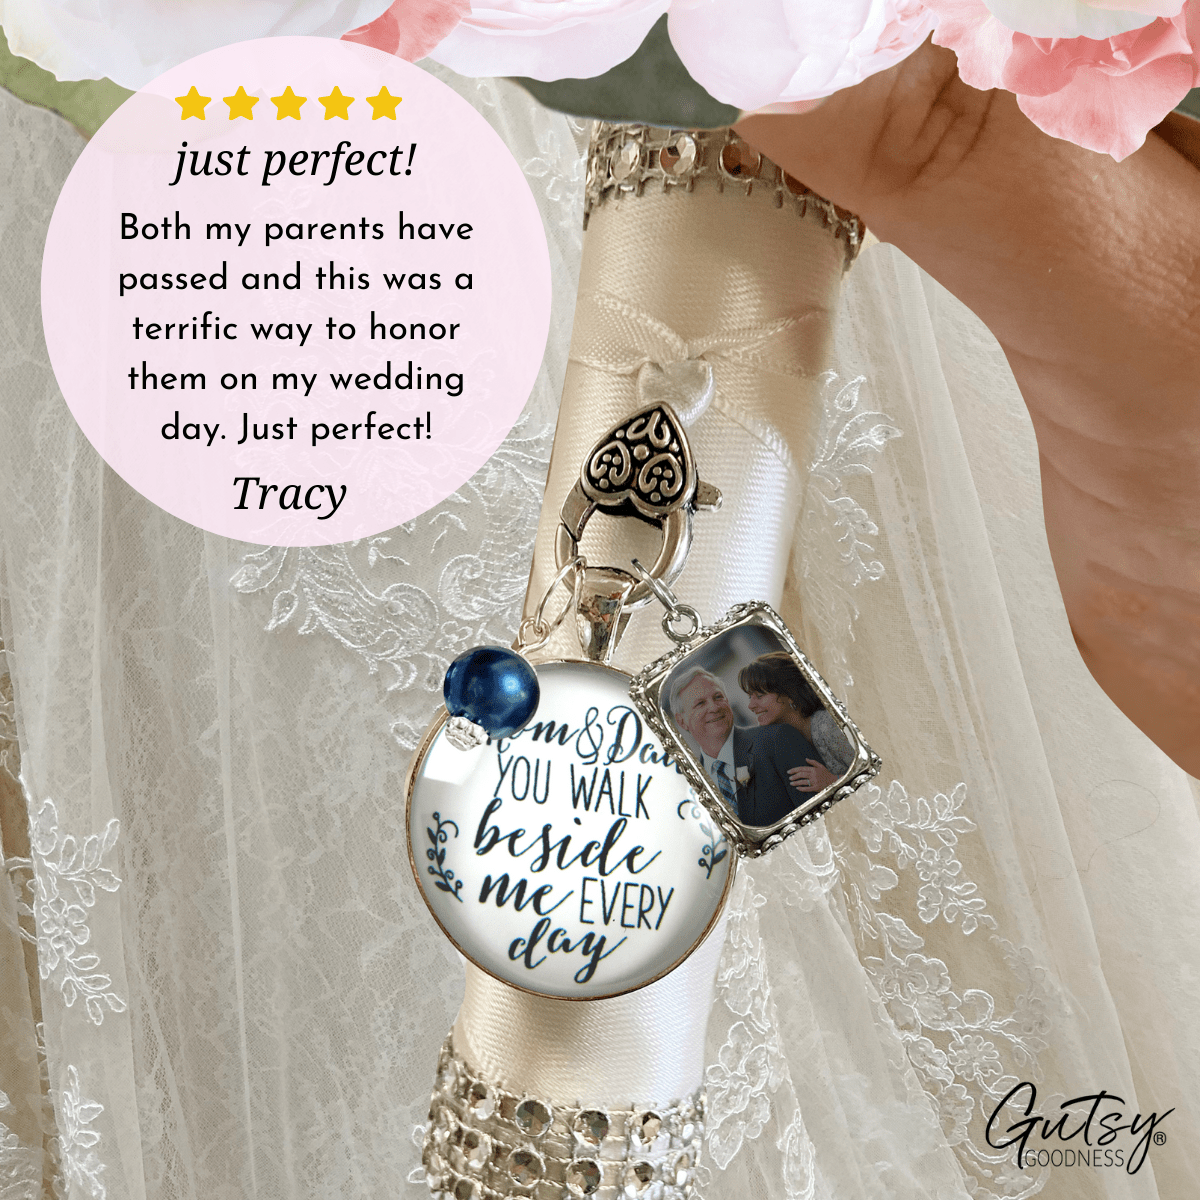 Bouquet Charm Bridal Mom And Dad Bride Parents White Blue Photo Frame Wedding Jewels - Gutsy Goodness Handmade Jewelry Gifts